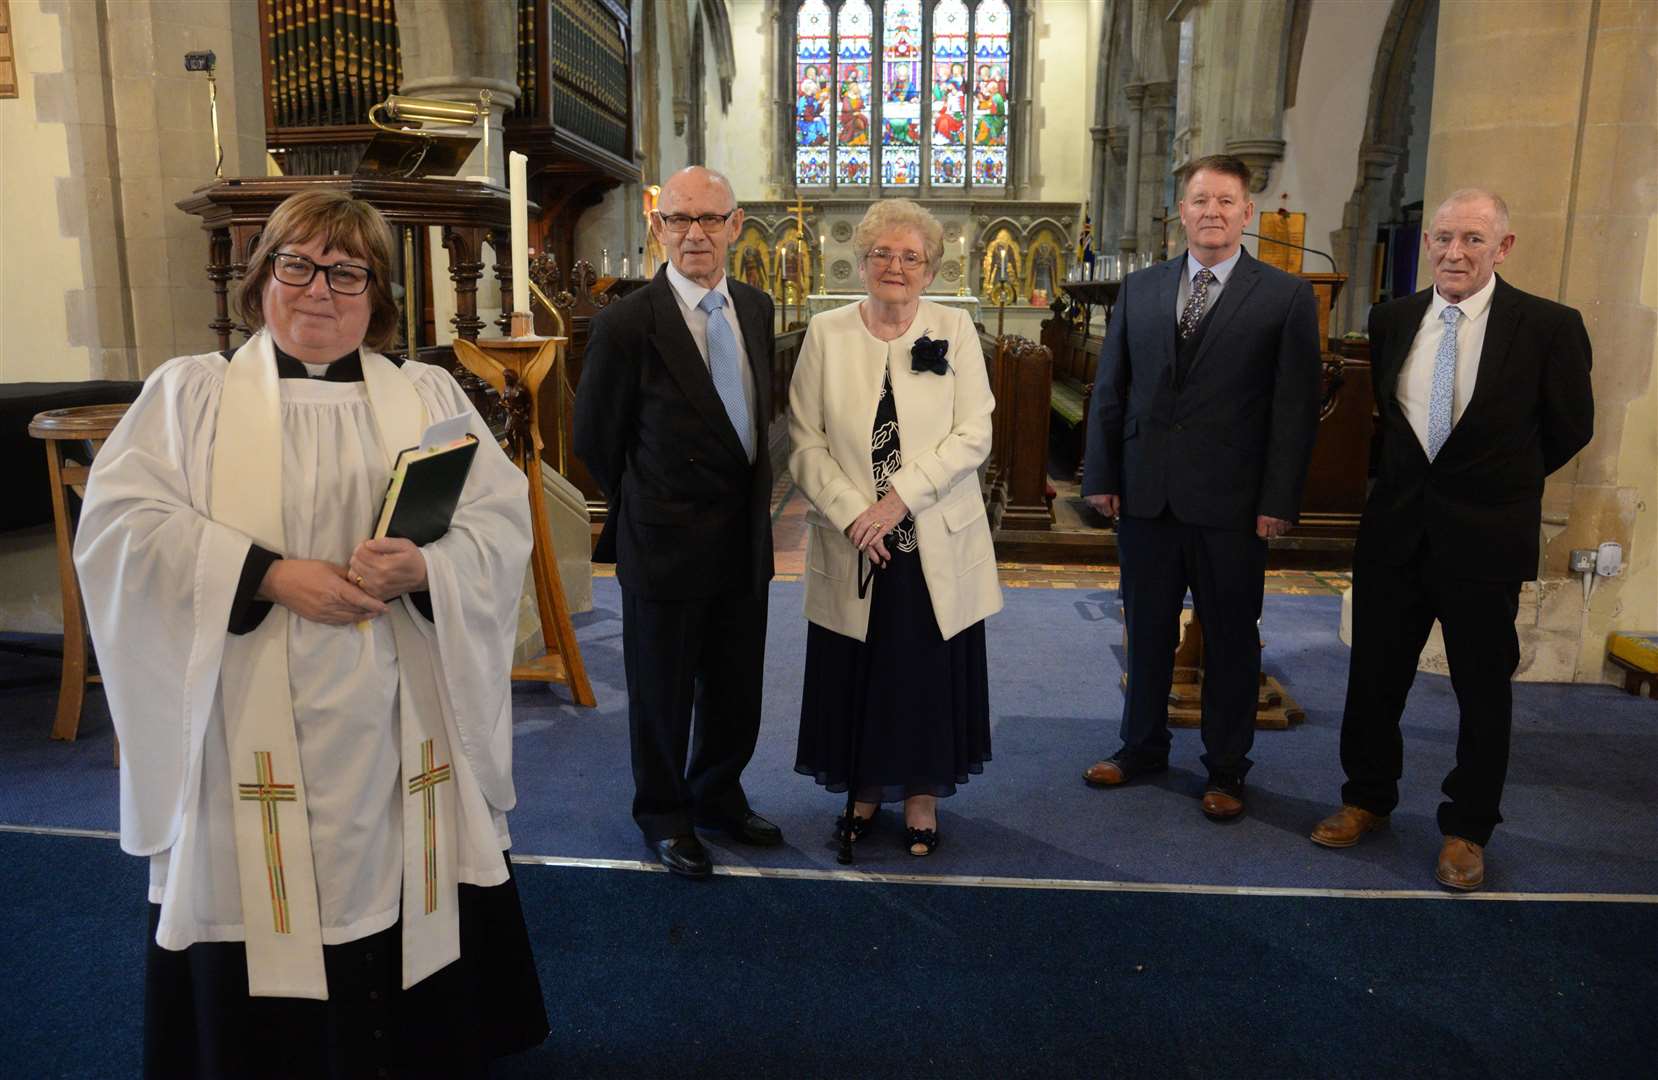 Rev Lesley Jones, Bill and Jean Ashworth at St Michael's Church in Sittingbourne with sons Mark and Andrew